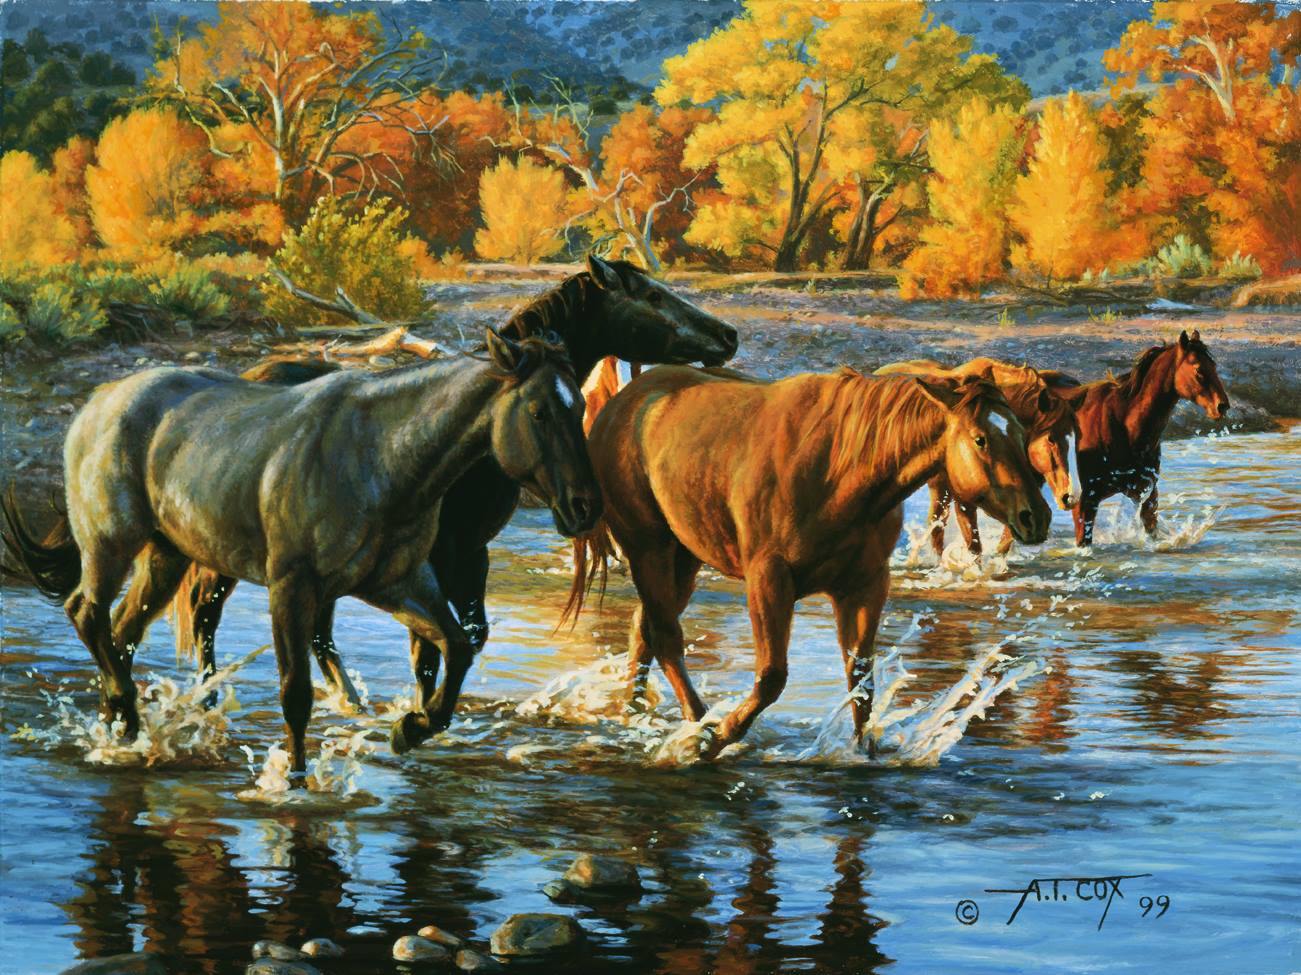 This is Tim Cox Fine Arts Horses Of The Creek